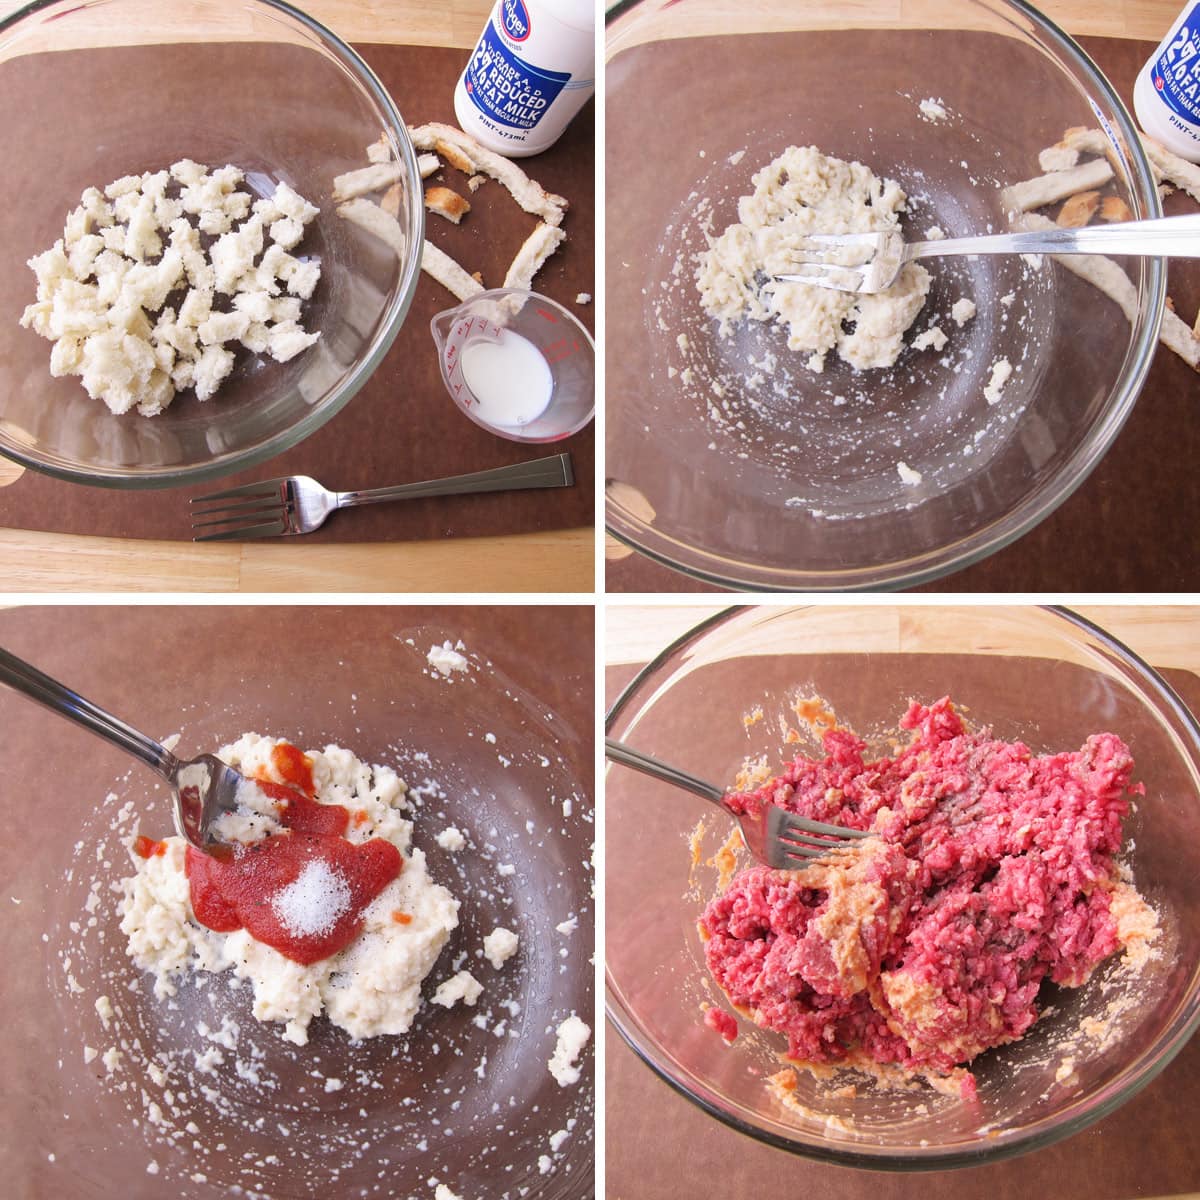 make panade using bread and milk then mix it into hamburger meat